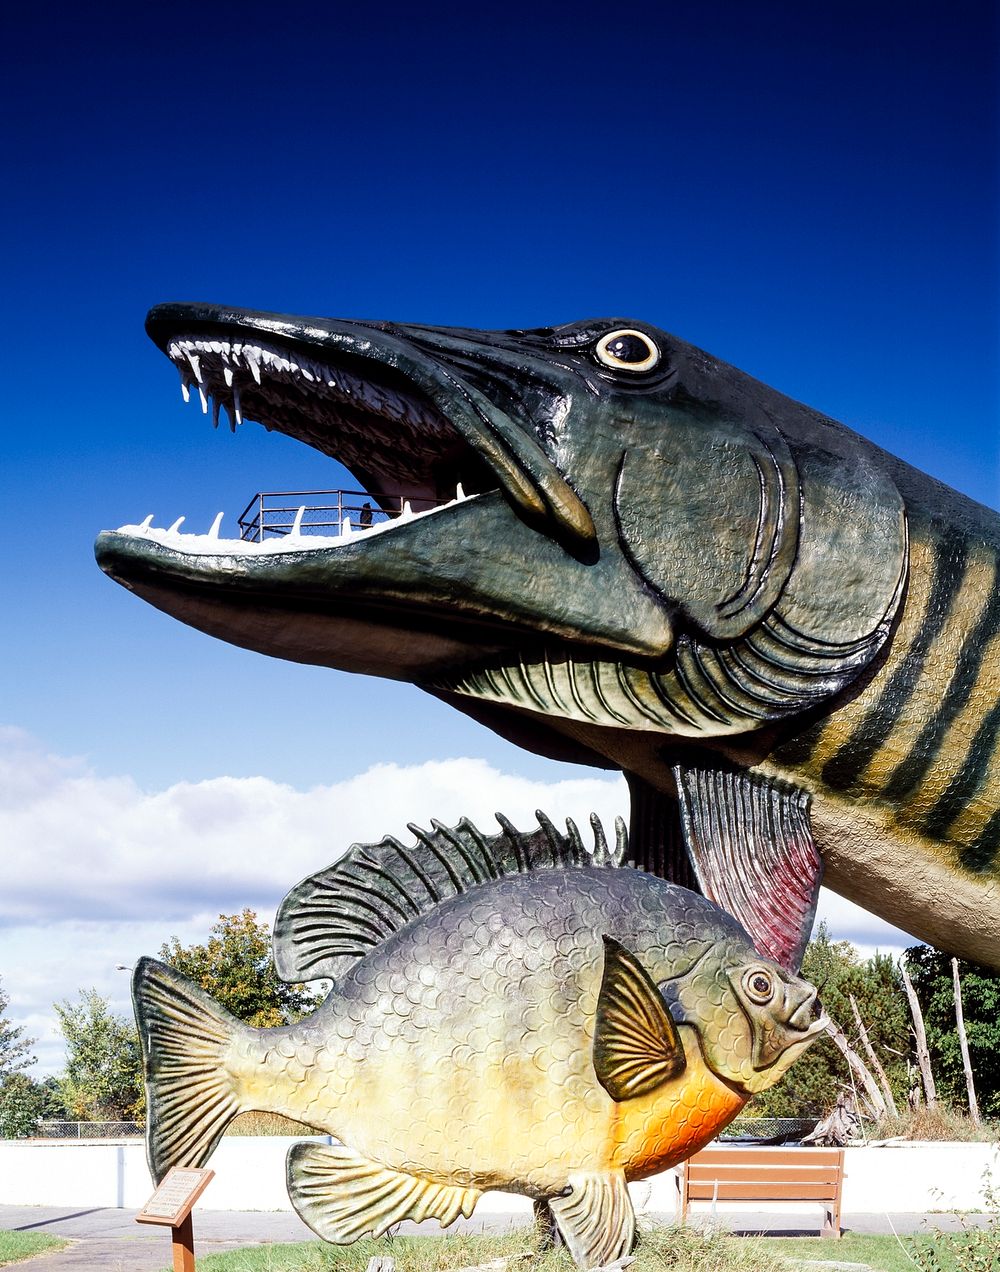 Mammoth Muskie at the Fishing Hall of Fame in Wisconsin. Original image from Carol M. Highsmith&rsquo;s America, Library of…